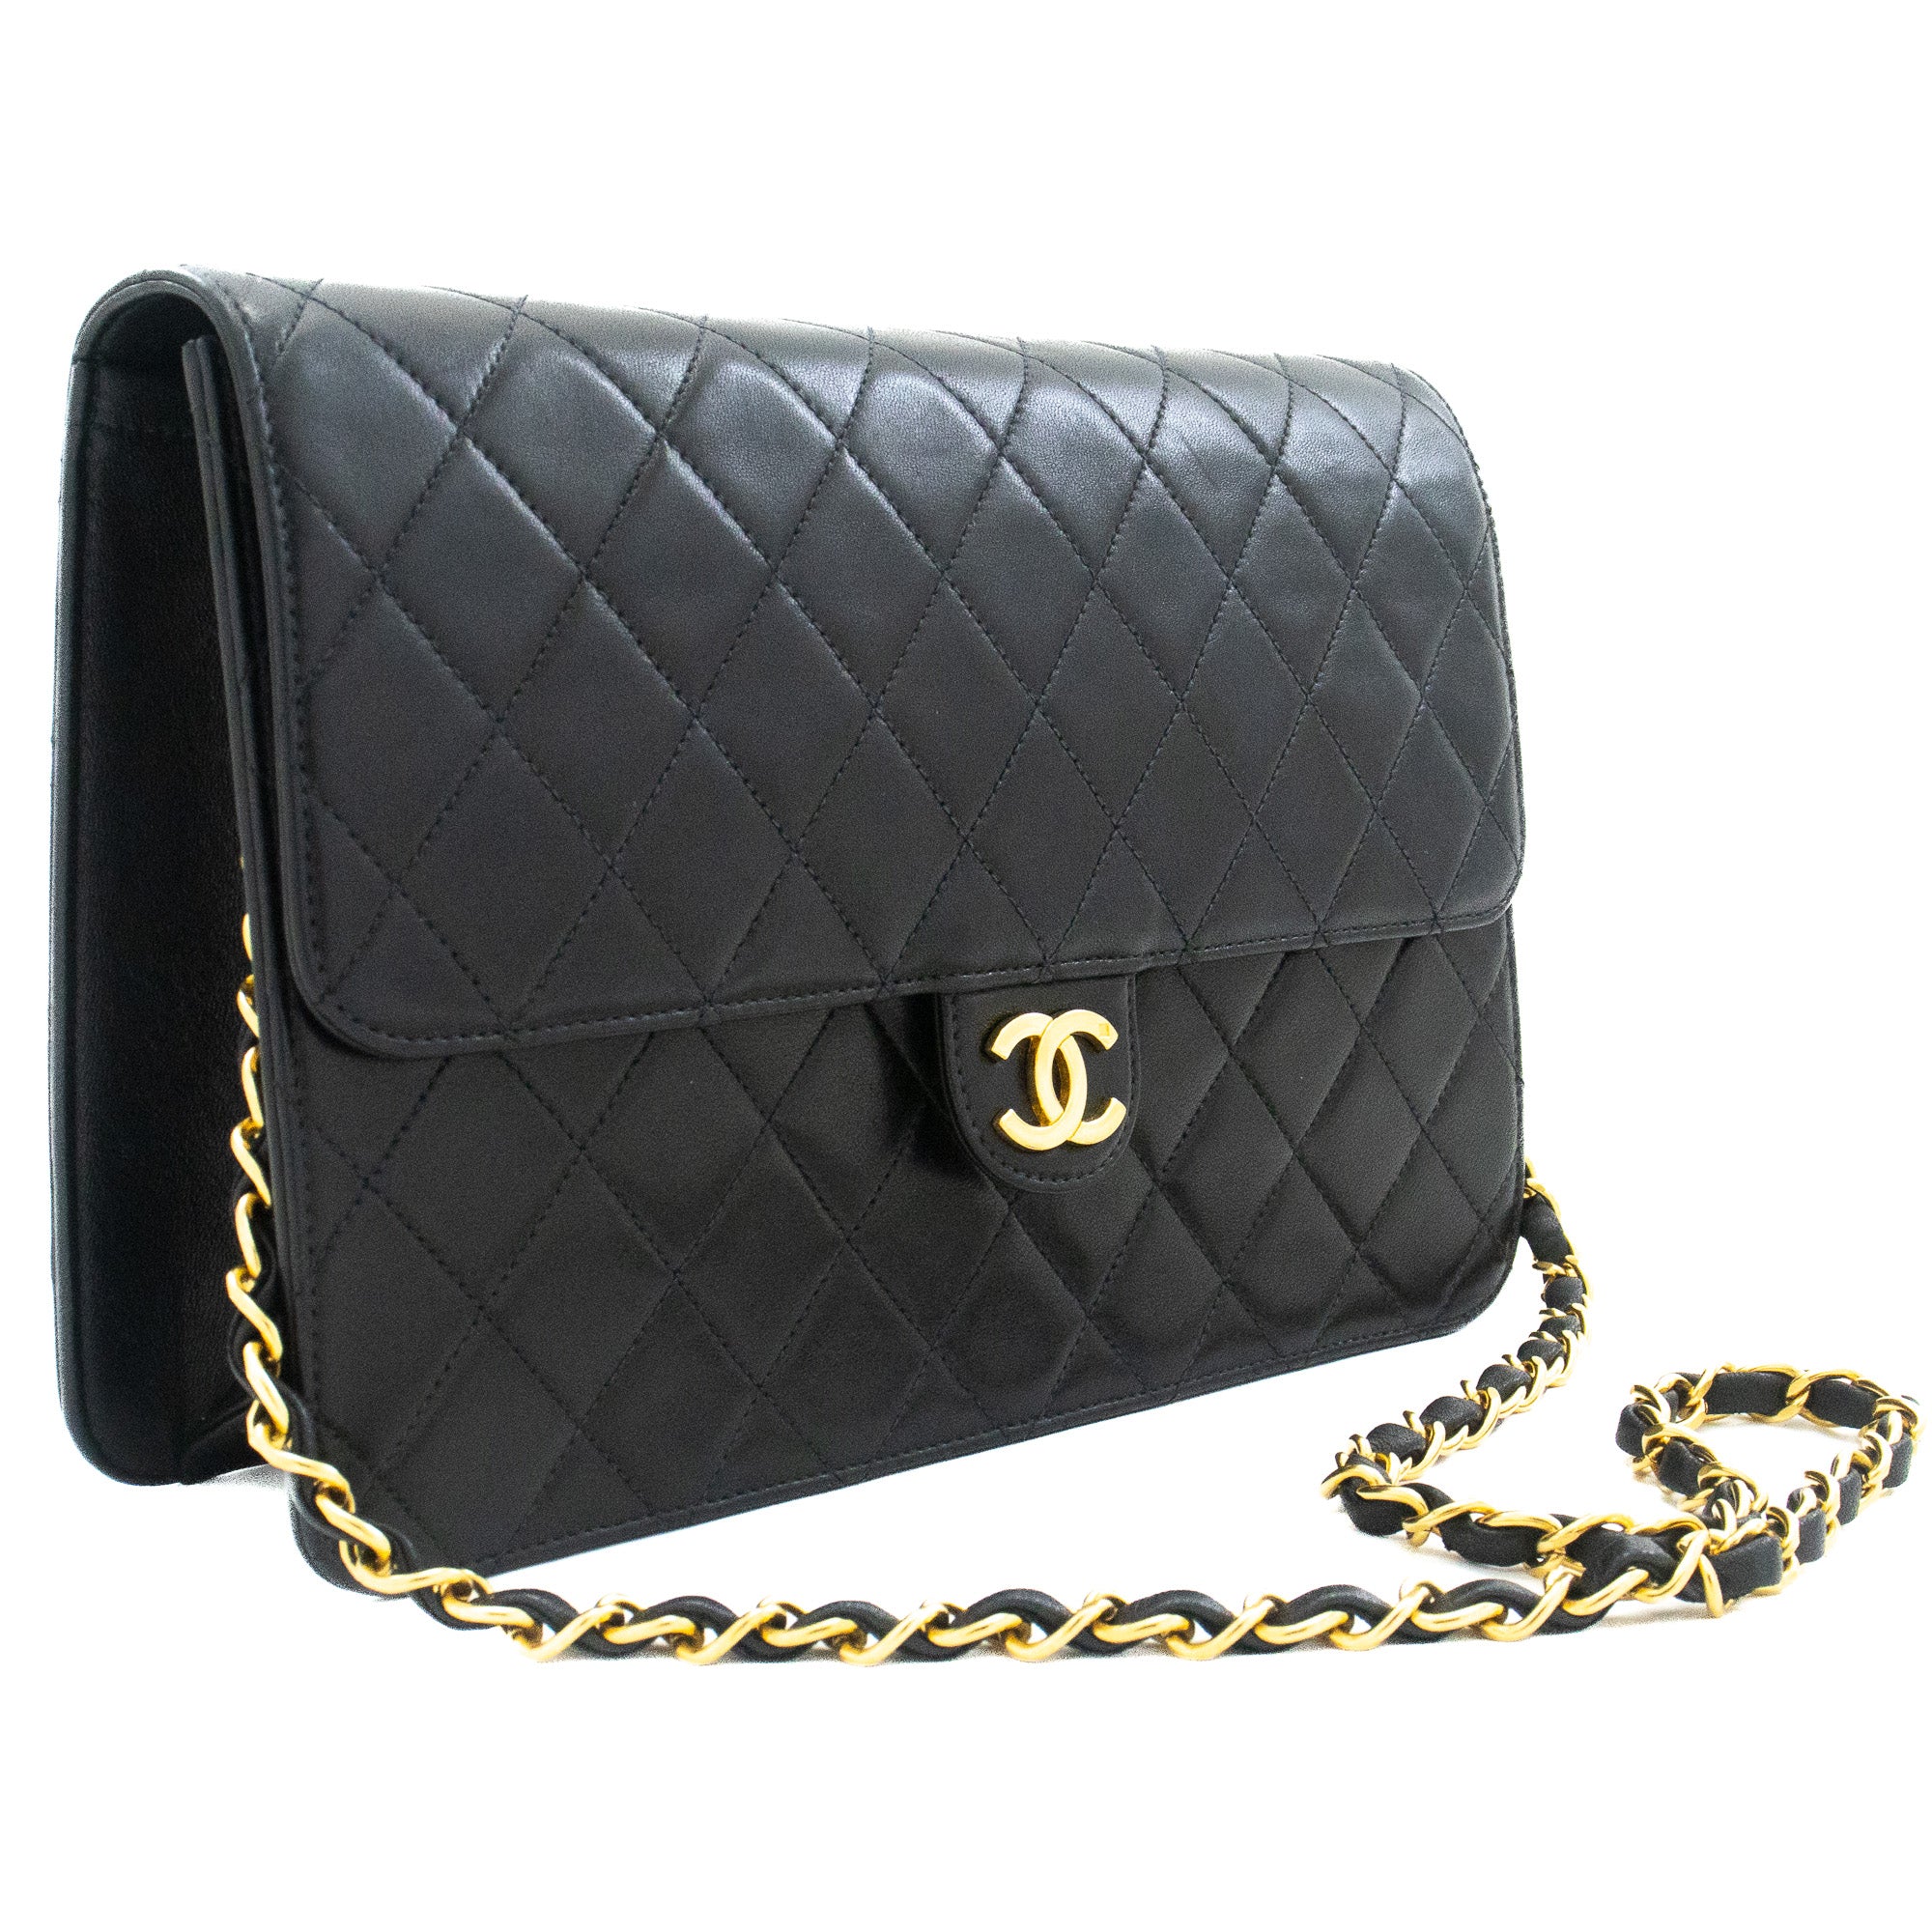 It feels wrong to splash out on a Chanel handbag  so Im going to buy this  instead